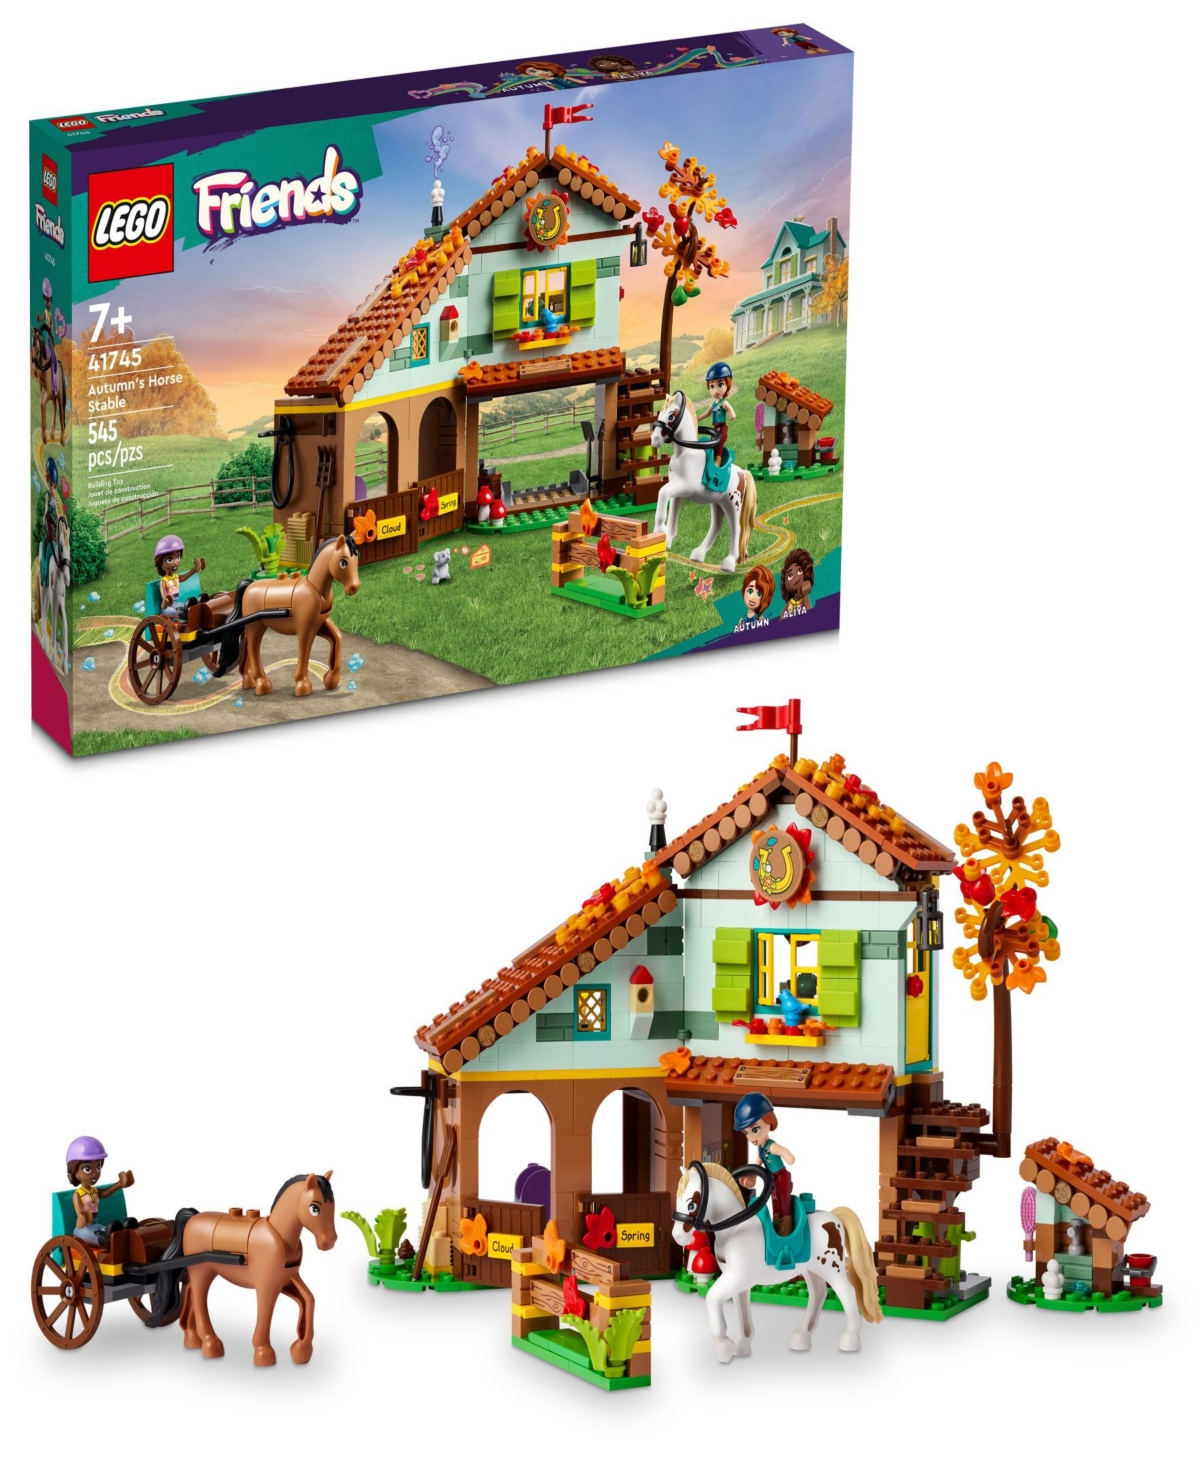 Lego Kids' Friends 41745 Autumn's Horse Stable Toy Building Set With Minifigures In Multicolor